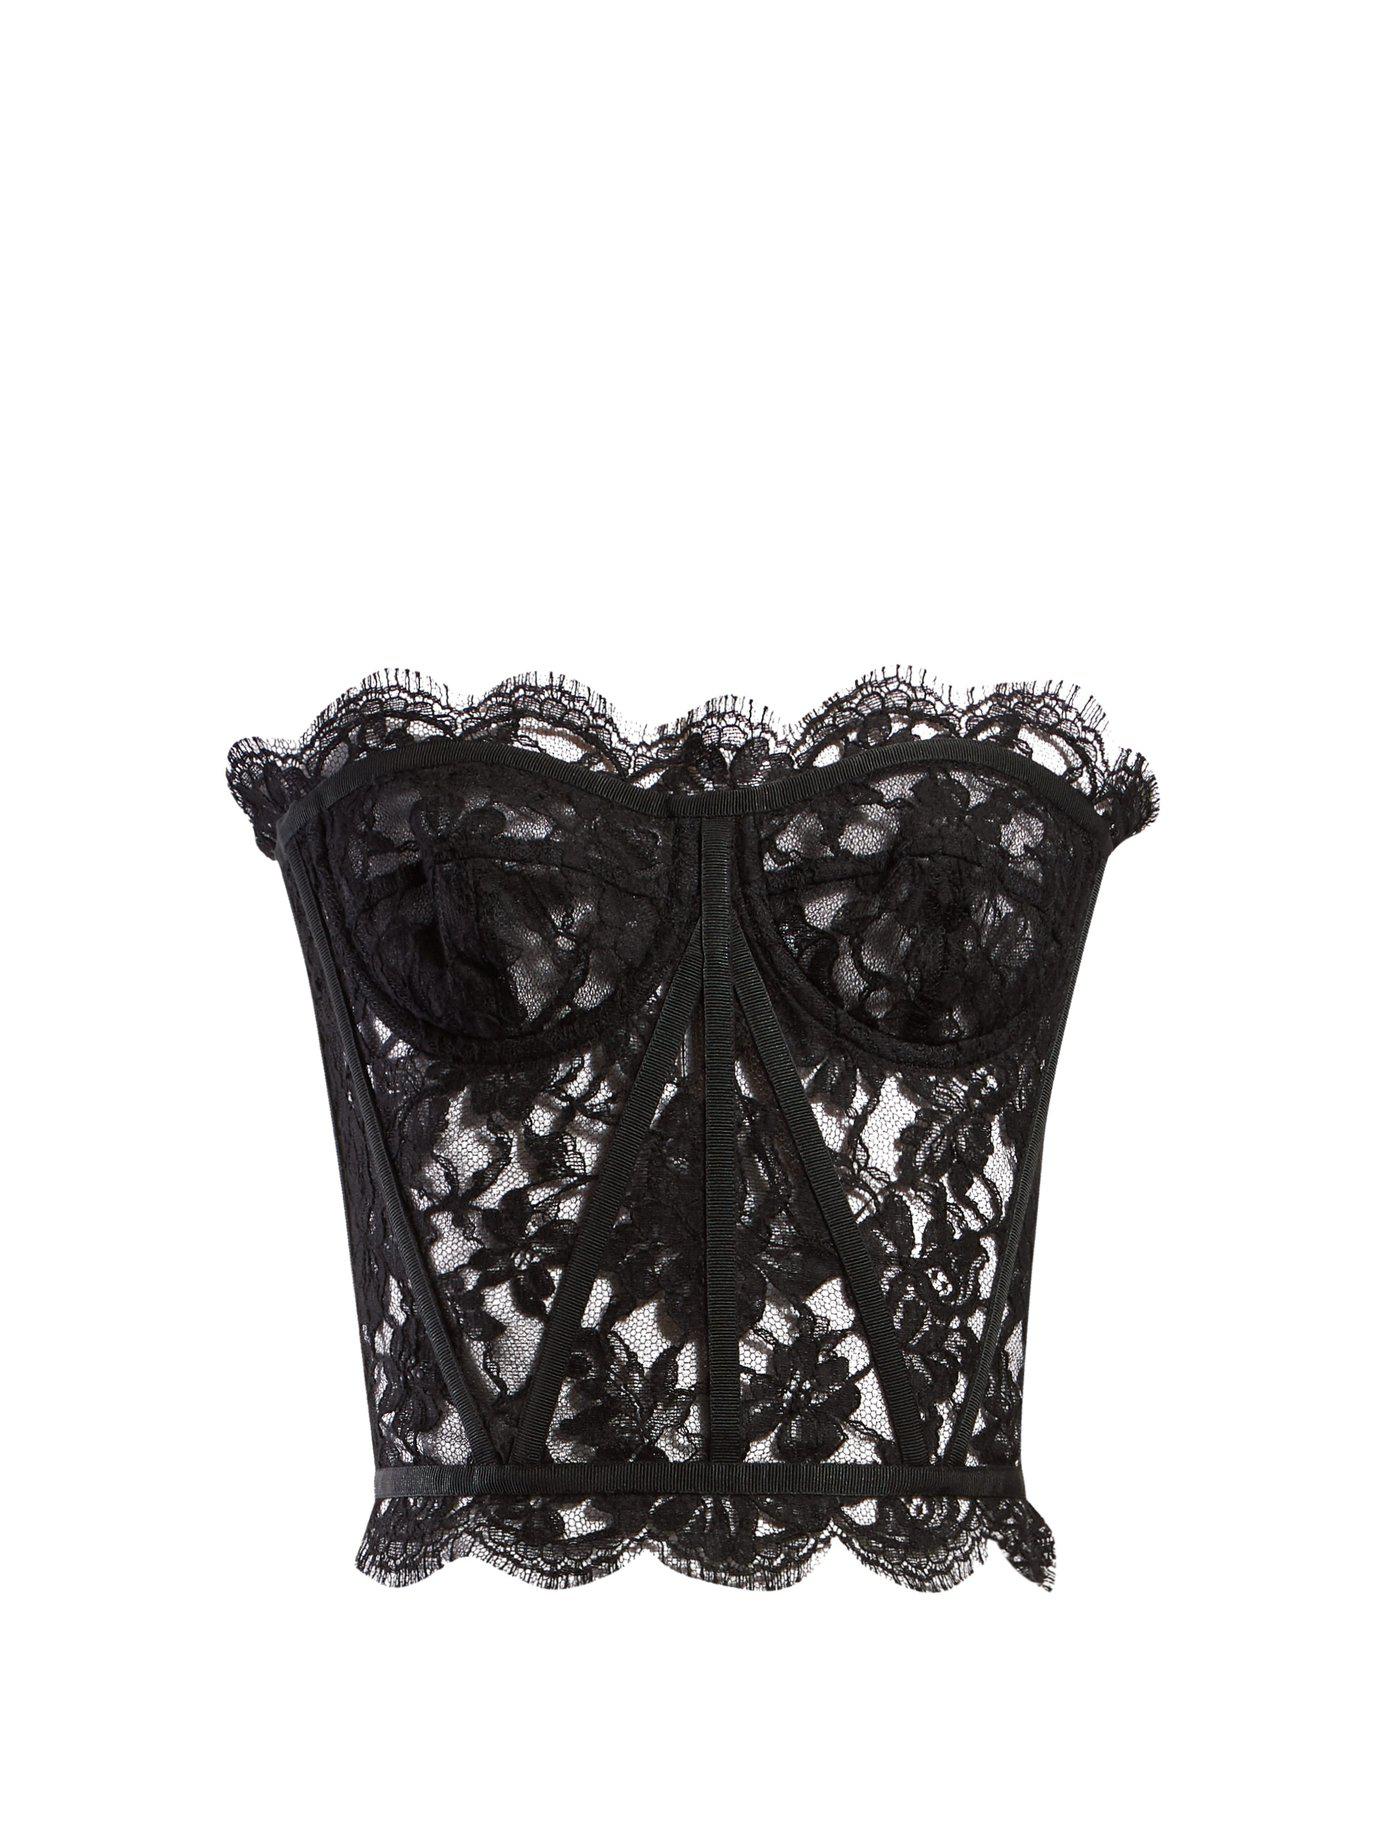 Dolce & Gabbana Scallop Edged Lace Bustier Top in Black | Lyst